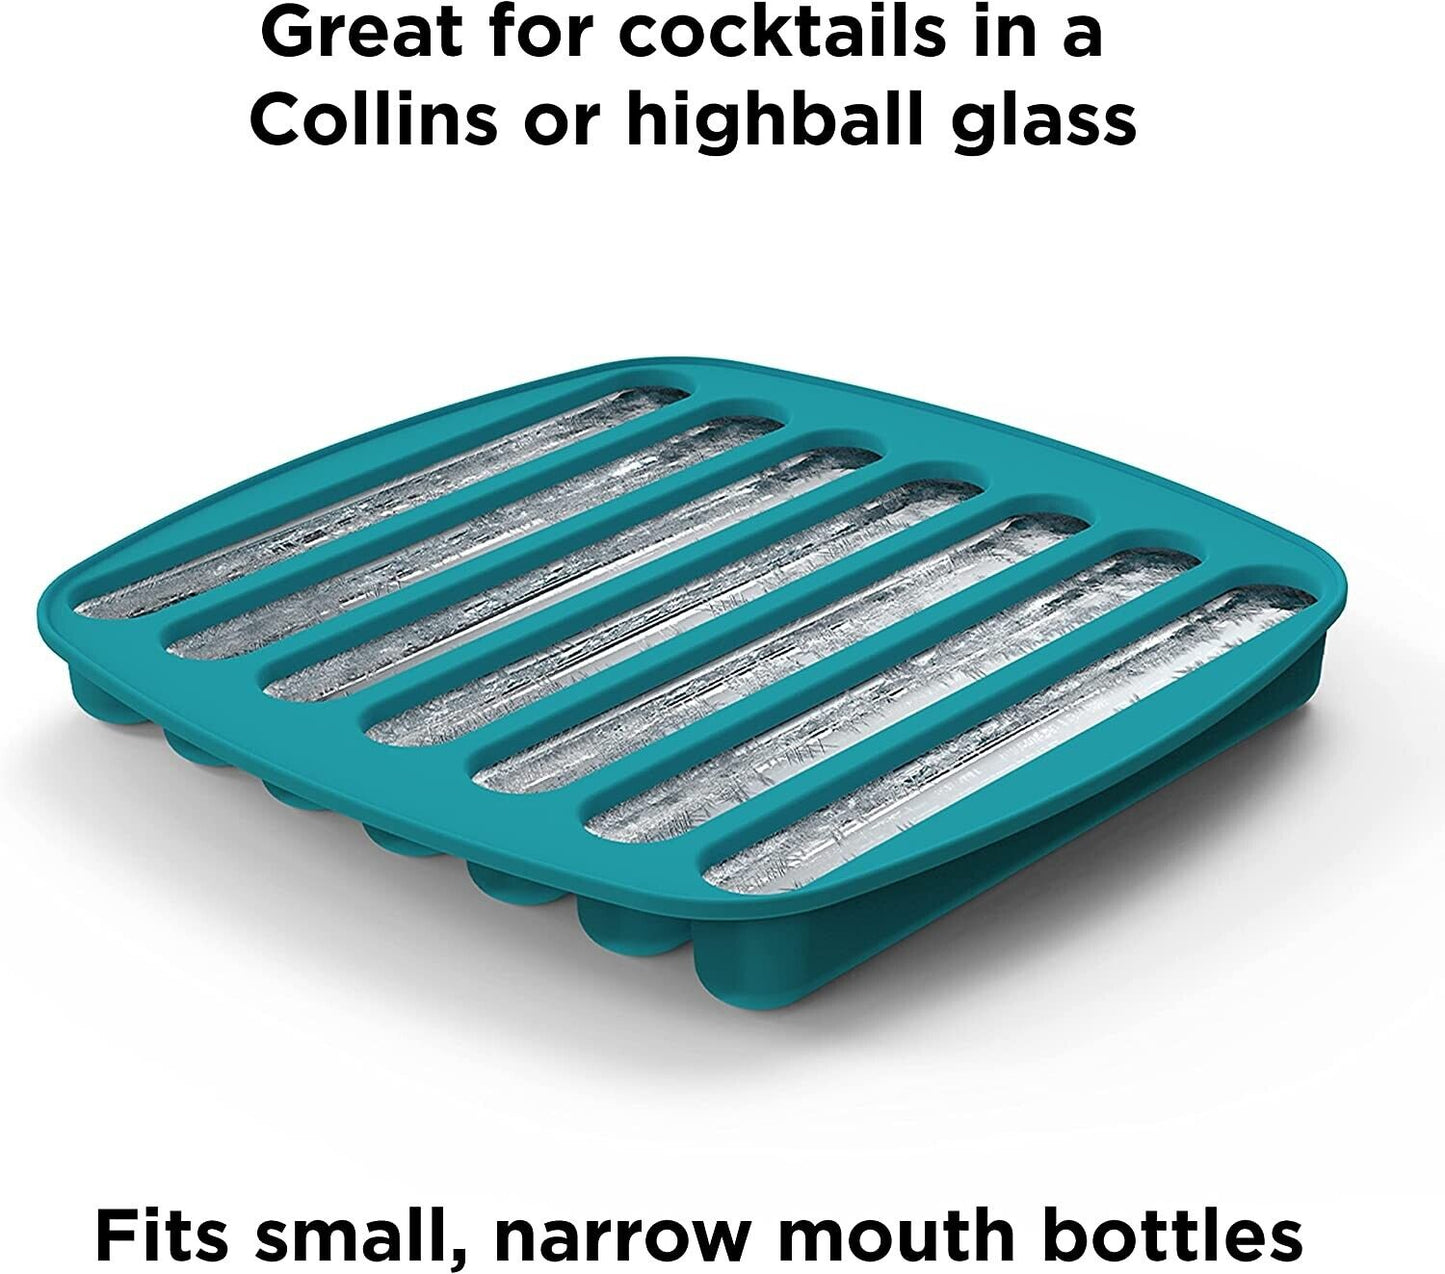 Houdini Silicone Collins Ice Tray with Easy to Remove Ice Spheres, Blue